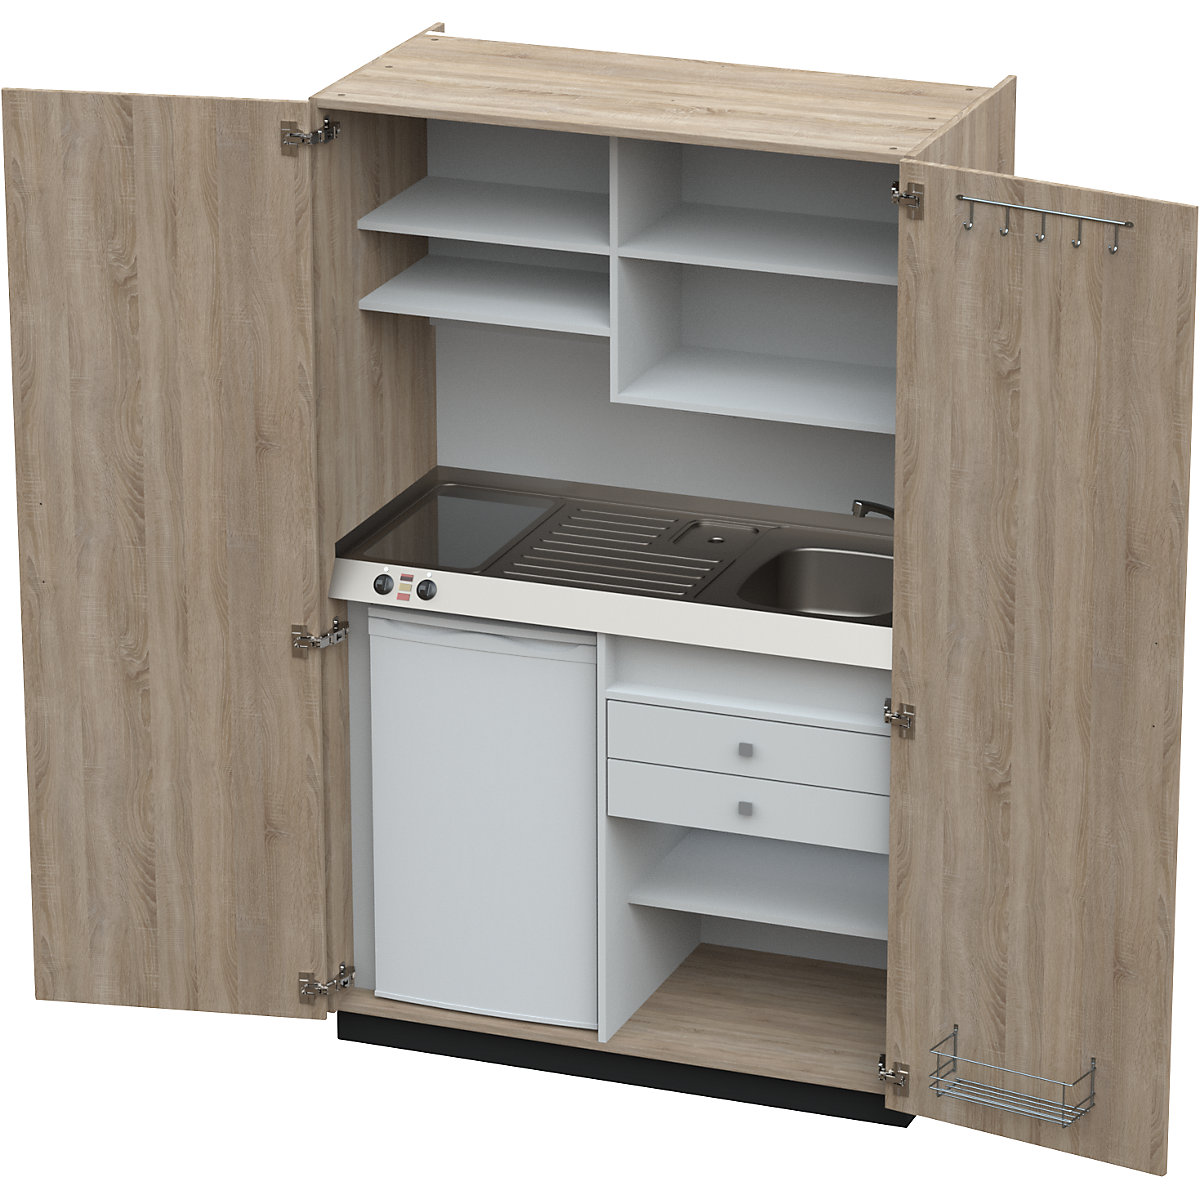 Kitchen unit with hinged doors, 2 glass ceramic hotplates, basin at right, oak, 1956 x 1200 x 650 mm-3